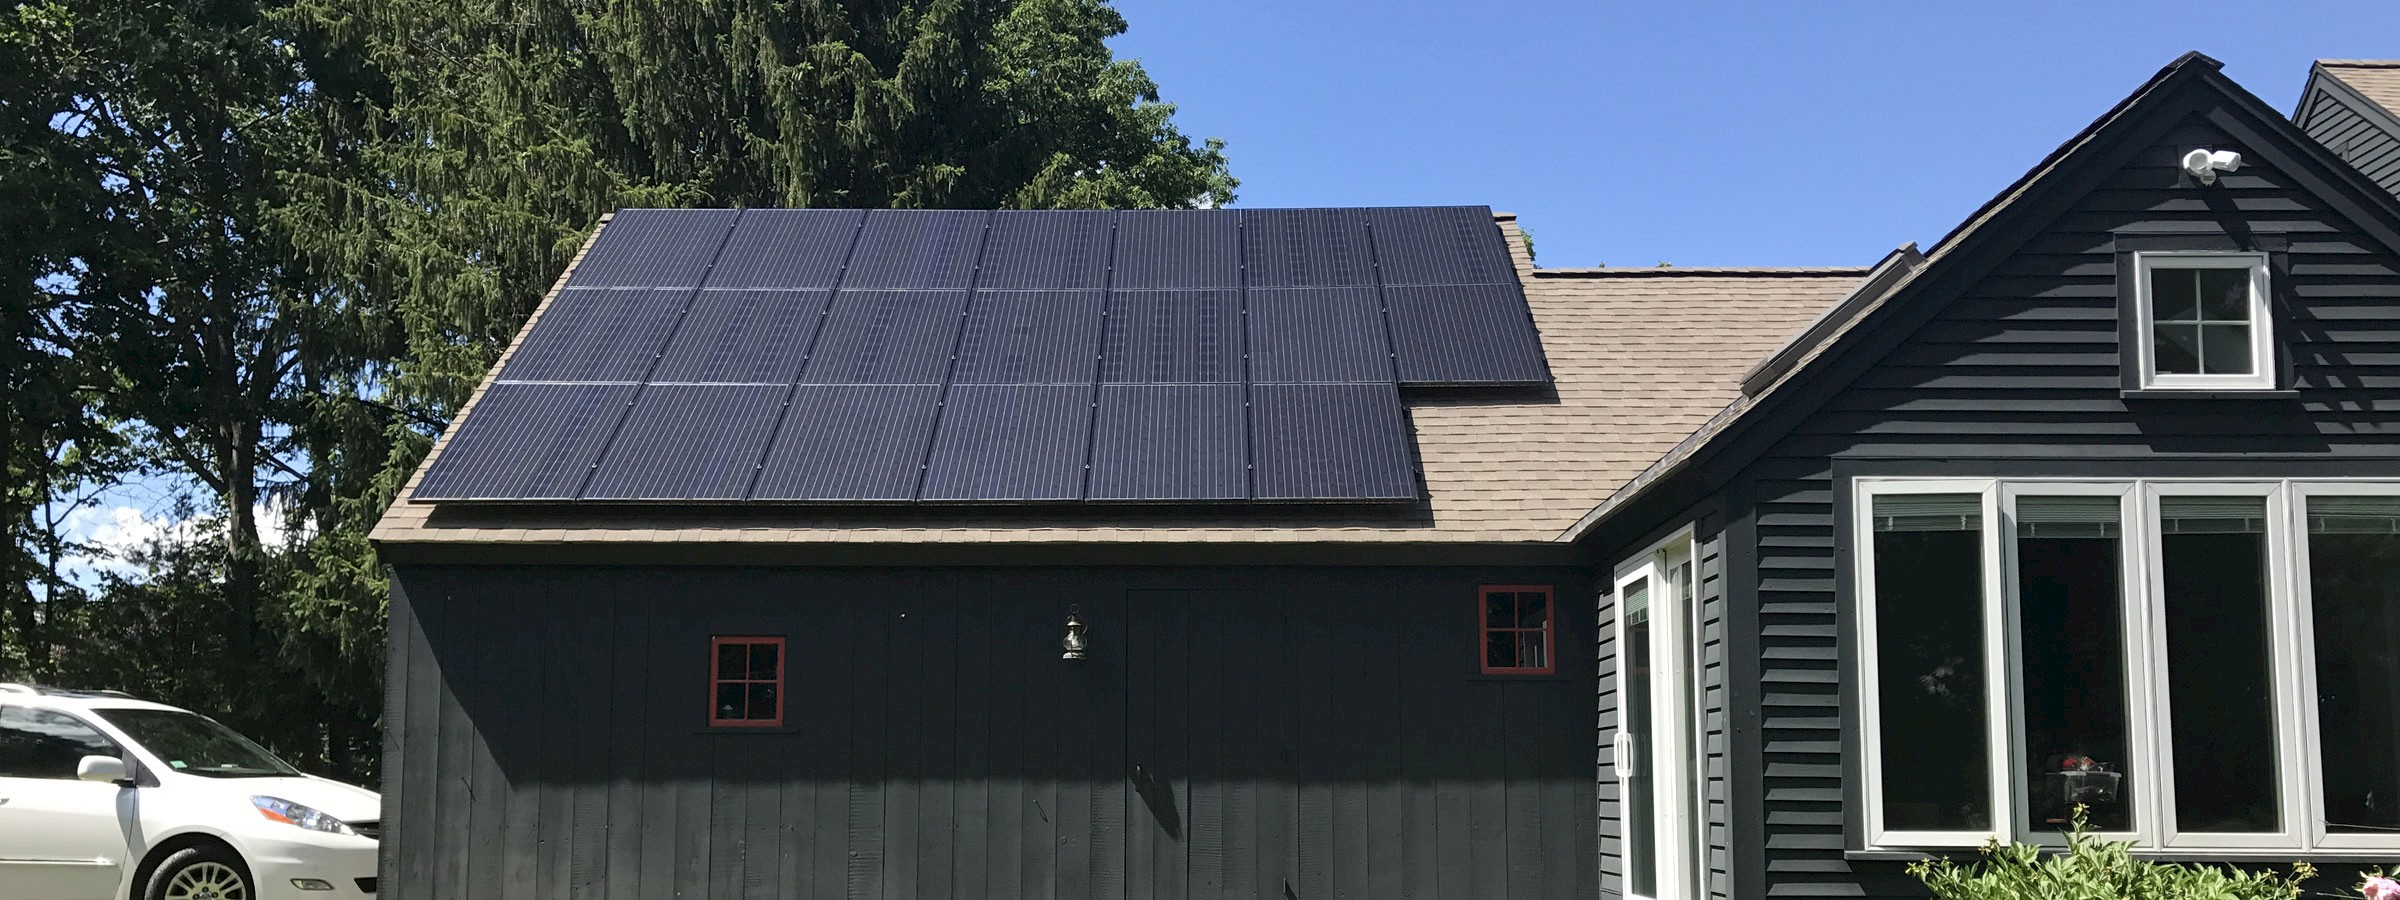 How Long Does It Take to Install Solar Panels?